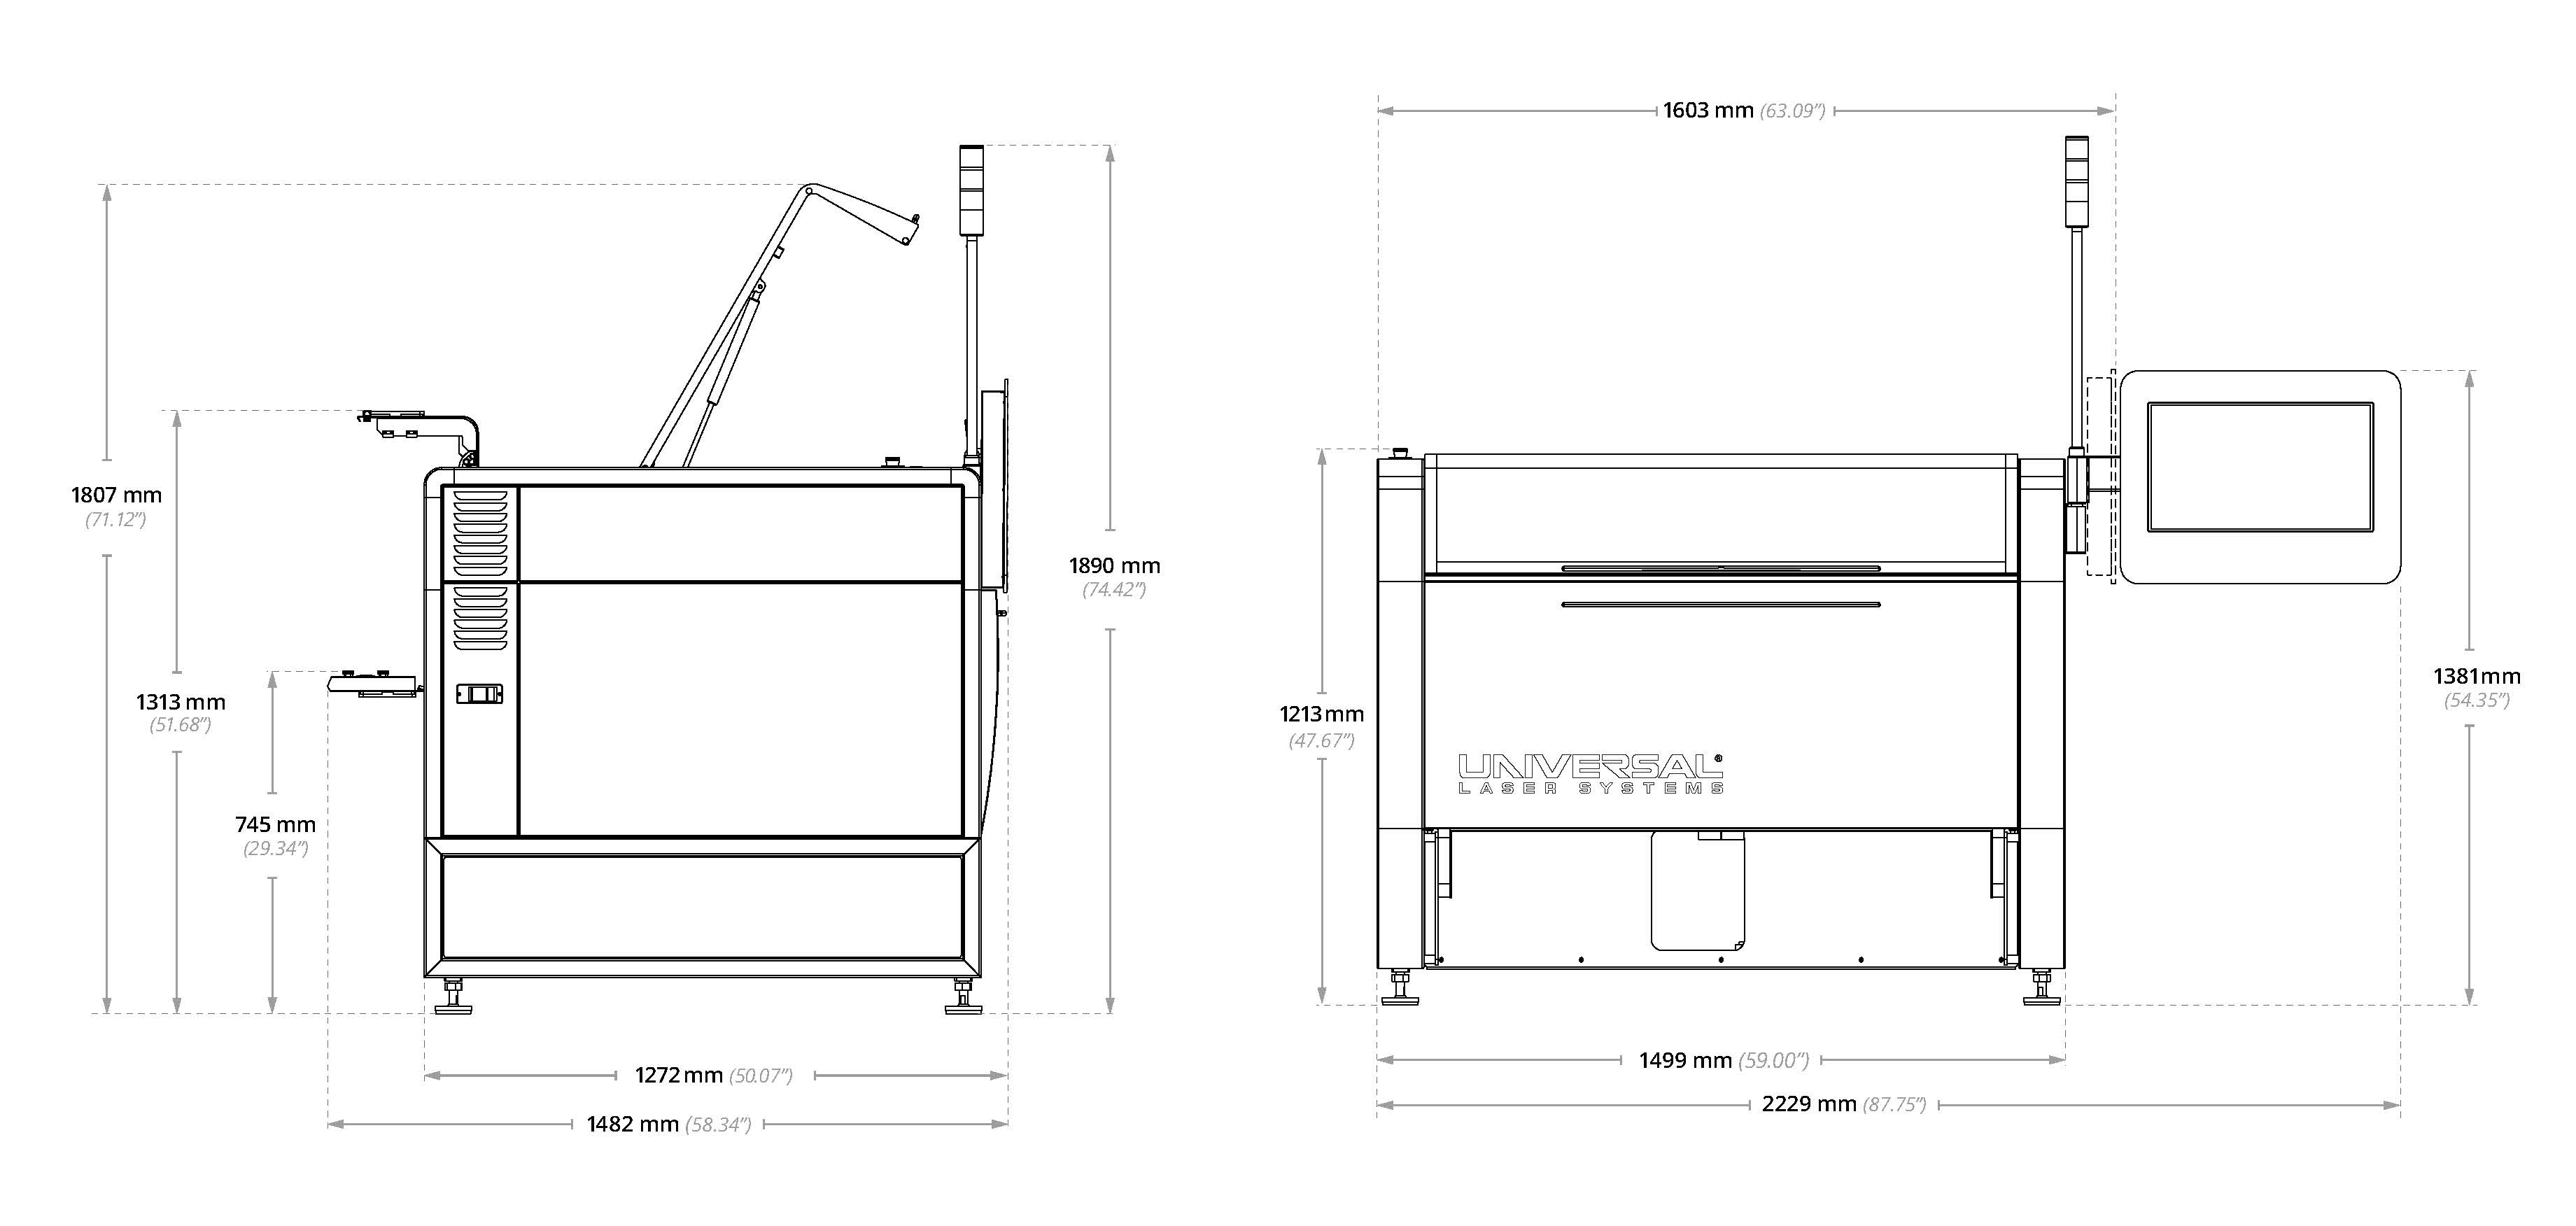 Ultra X6000 Line Drawings with Dimensions